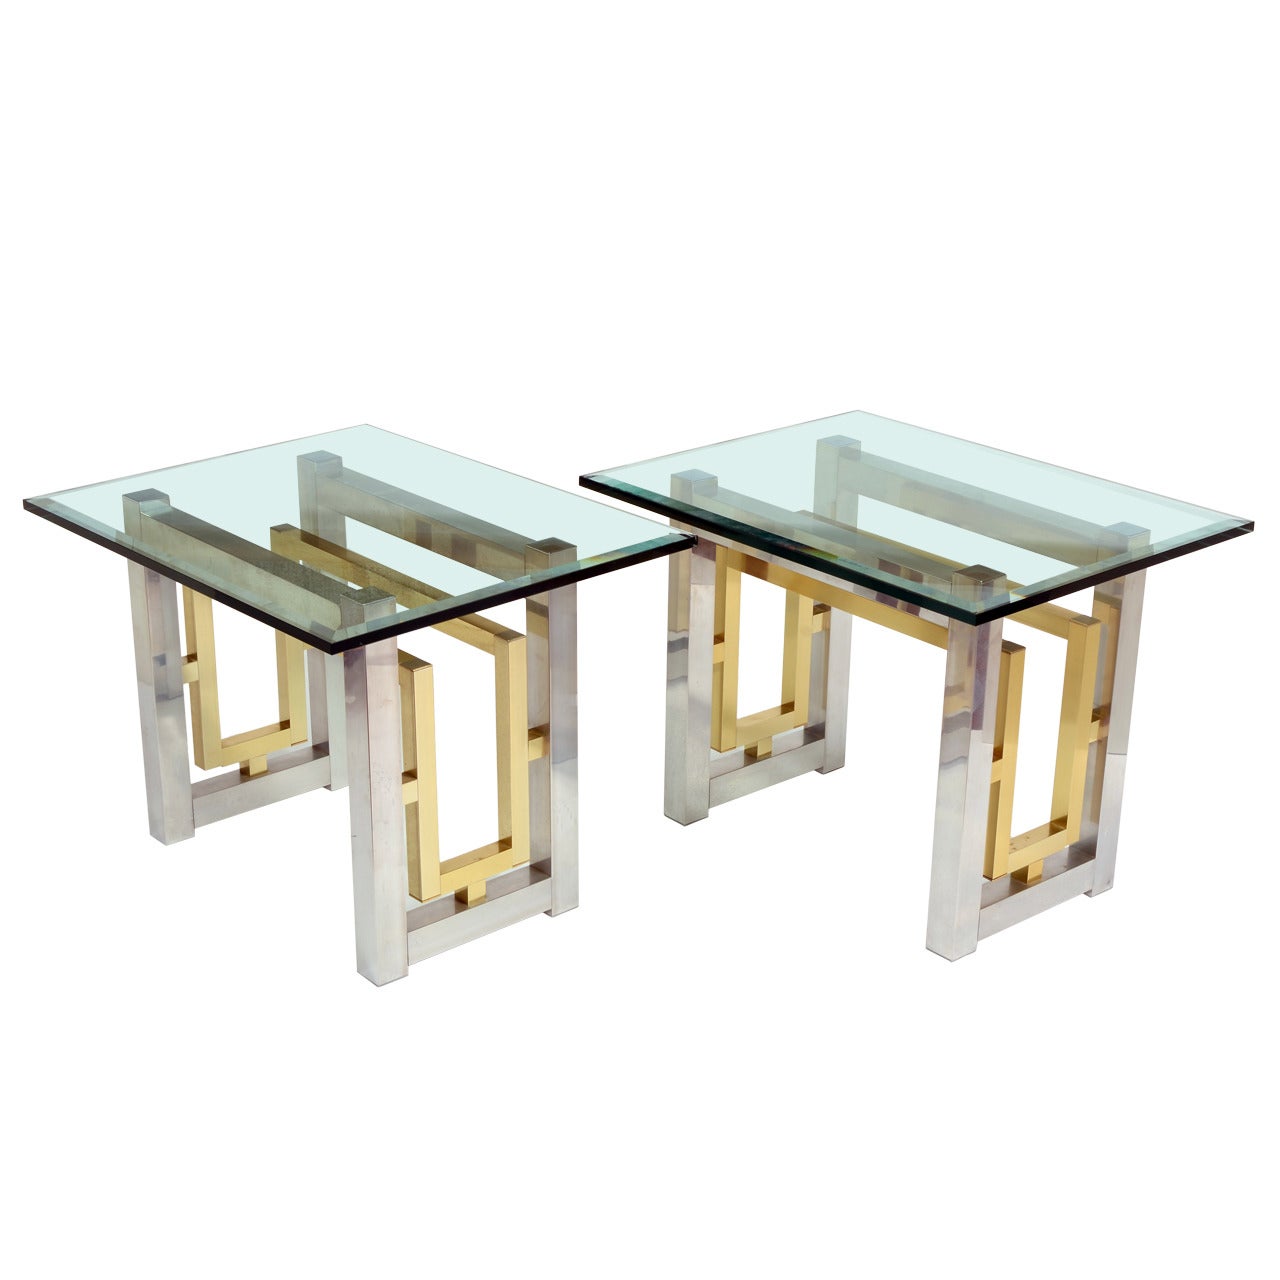 Pair of Chrome and Brass Pierre Cardin Style End Table Bases